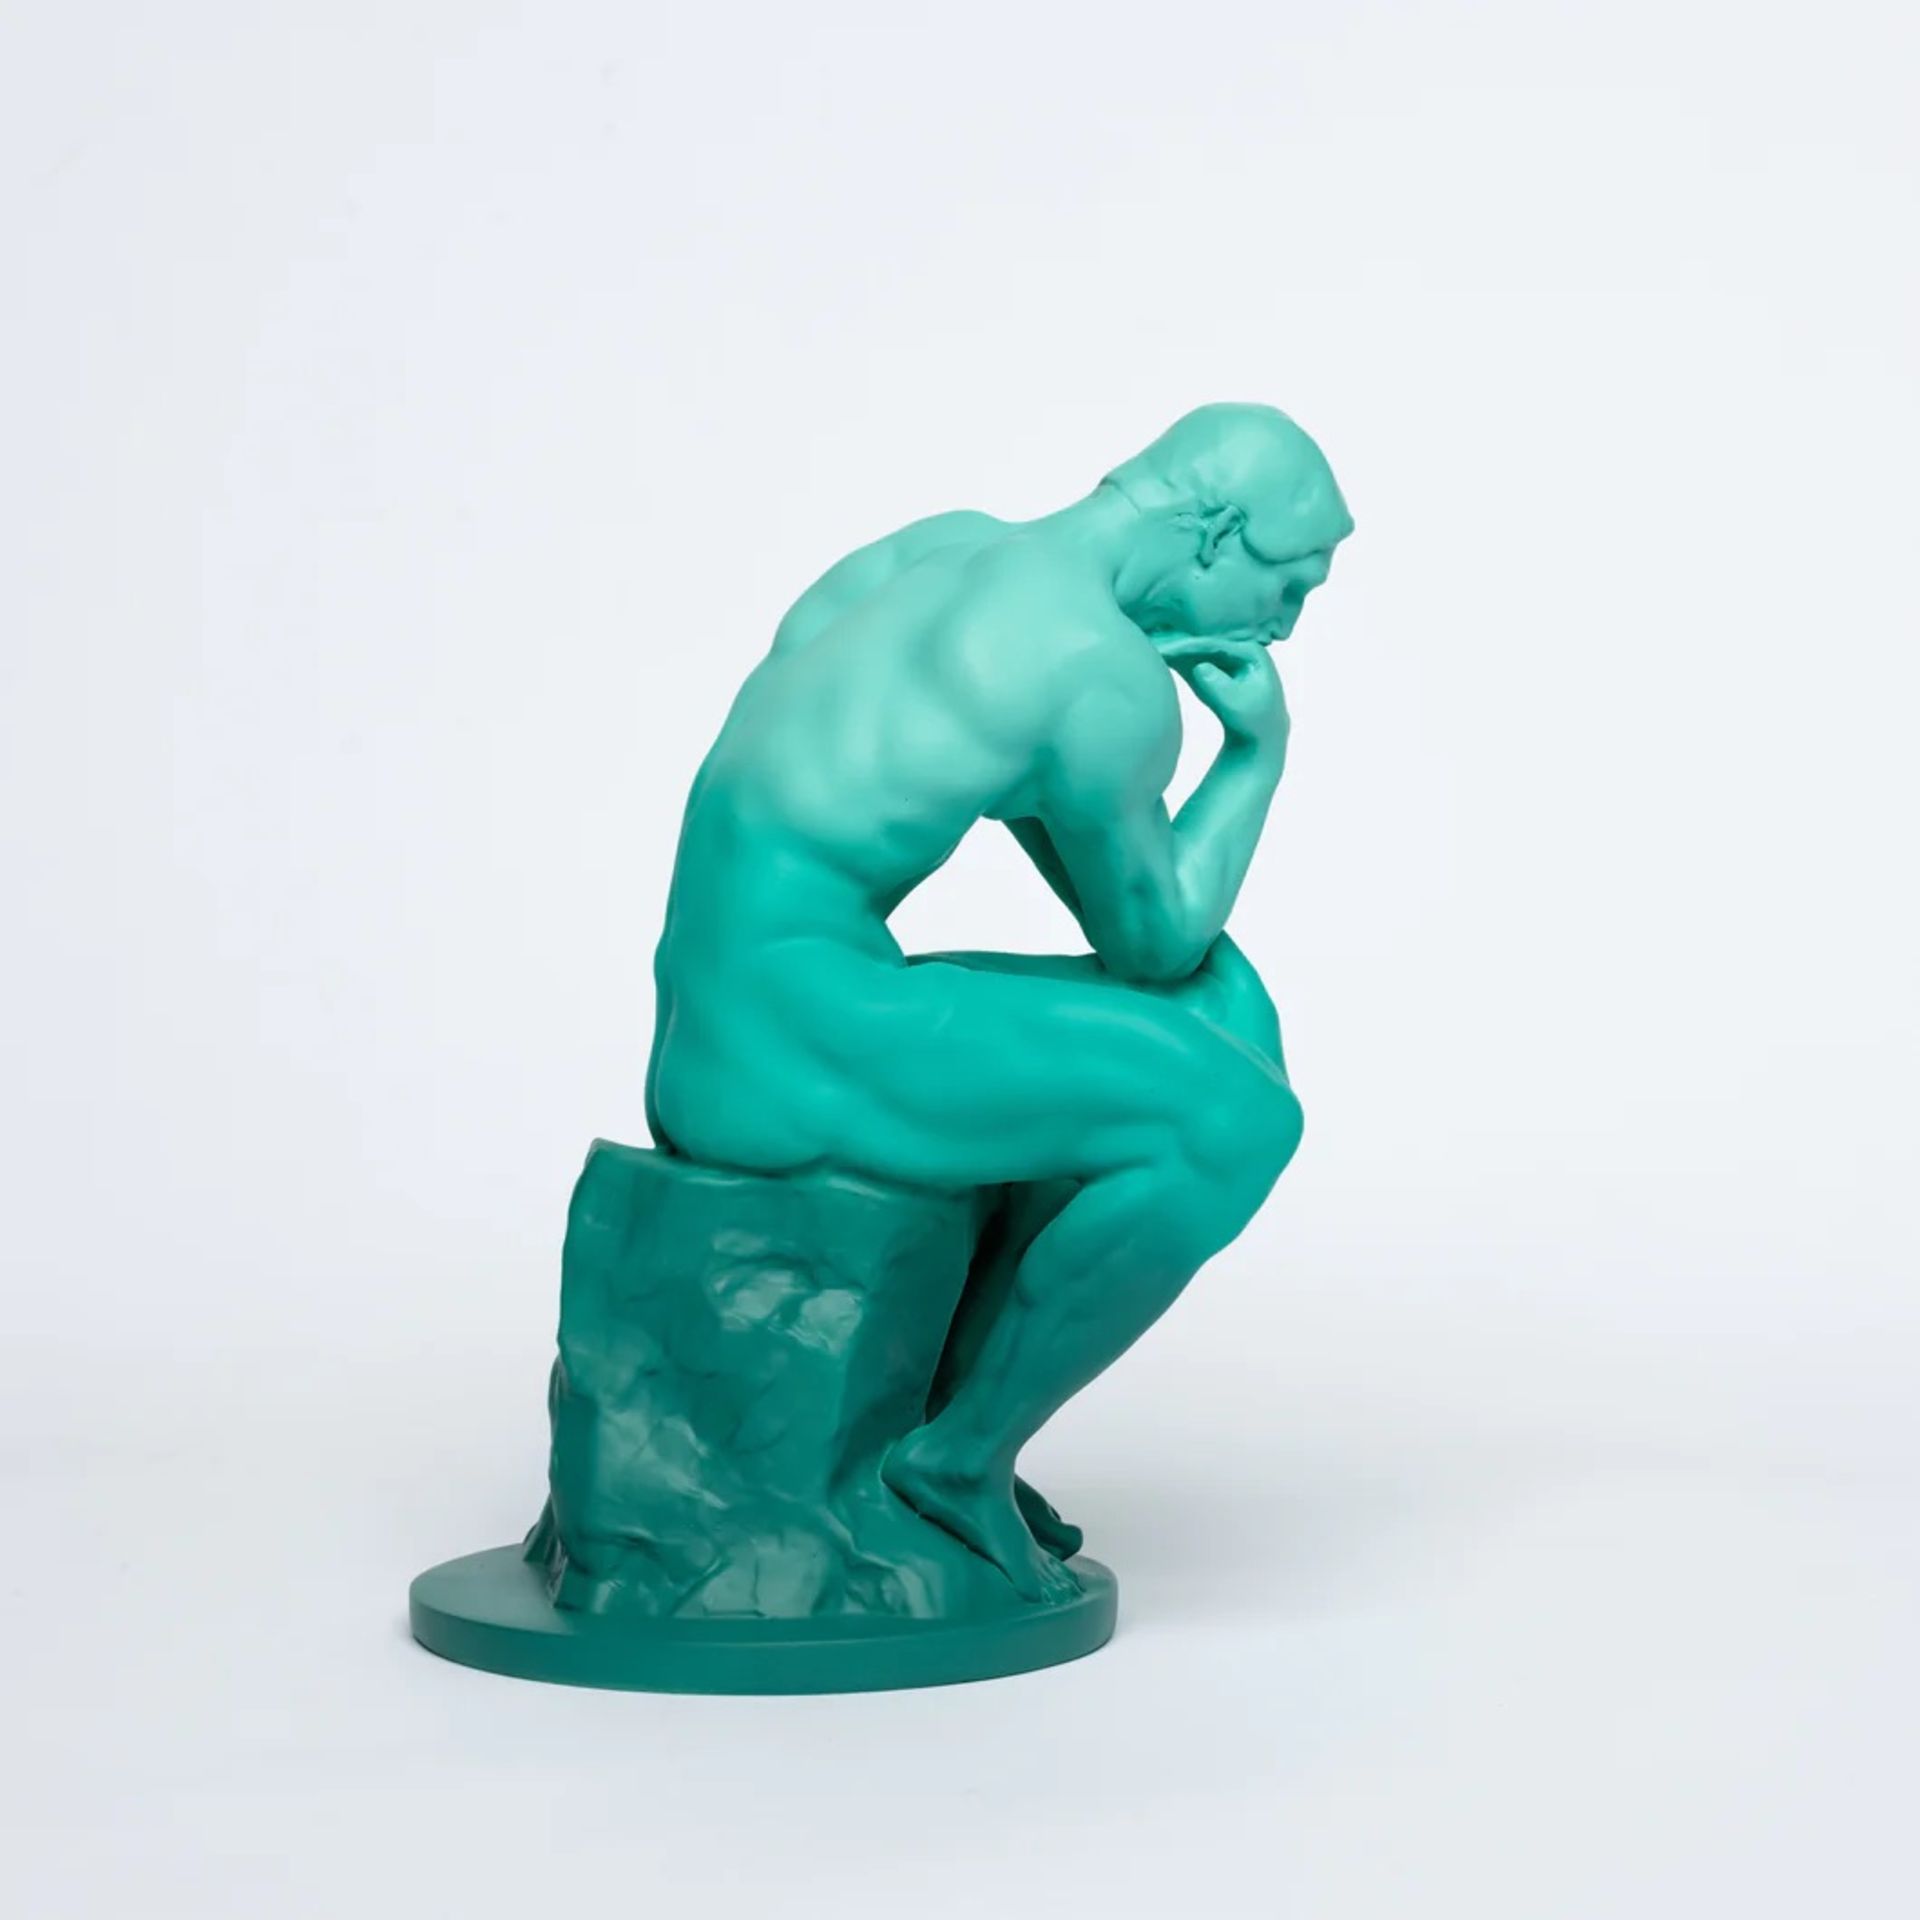 Auguste Rodin "The Thinker, 1904" Sculpture - Image 3 of 5